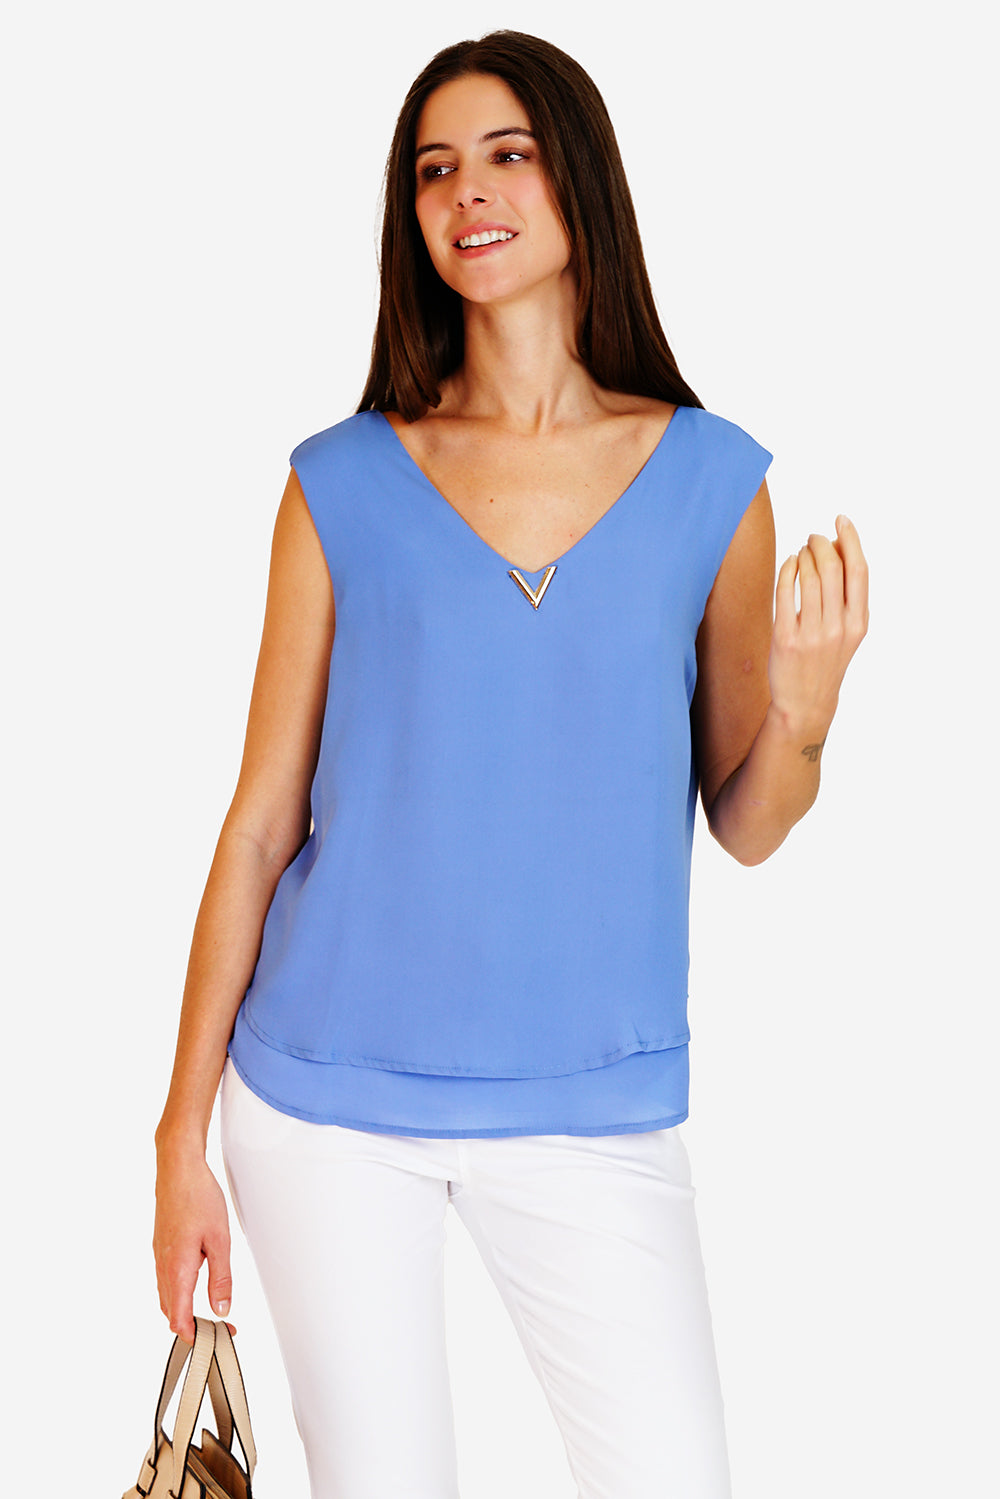 Top with lined sleeveless fancy front